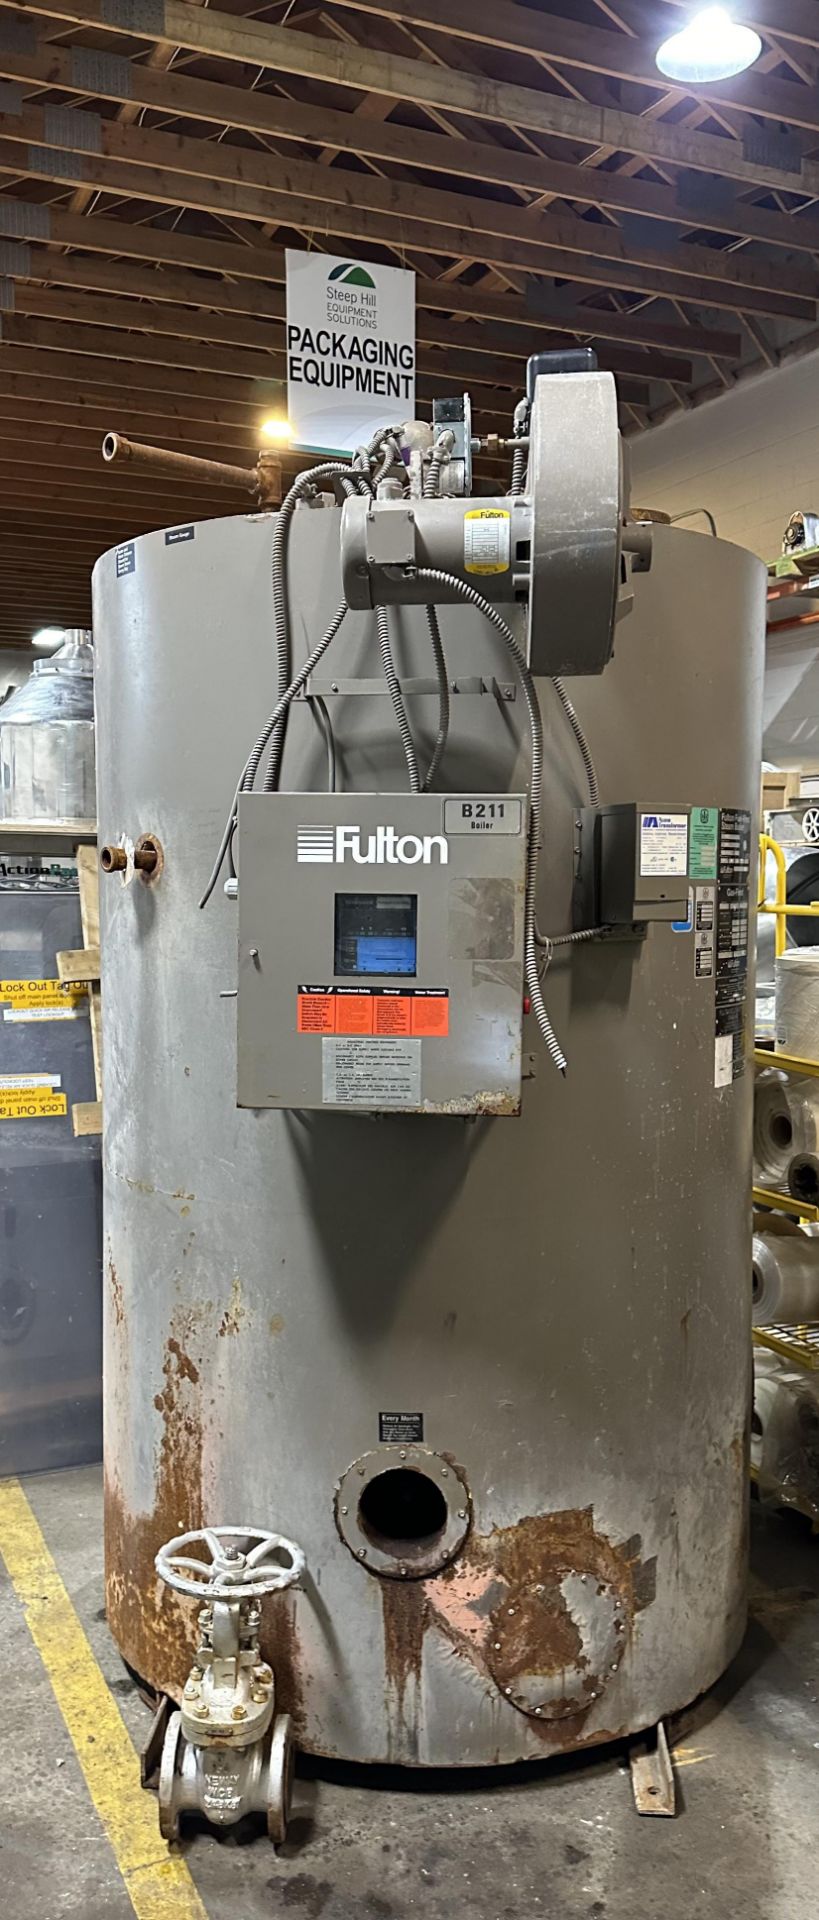 Fulton Boiler 50 HP - Natural Gas Boiler rated for 1725lbs Steam/hr. Fire/Water jackets are in